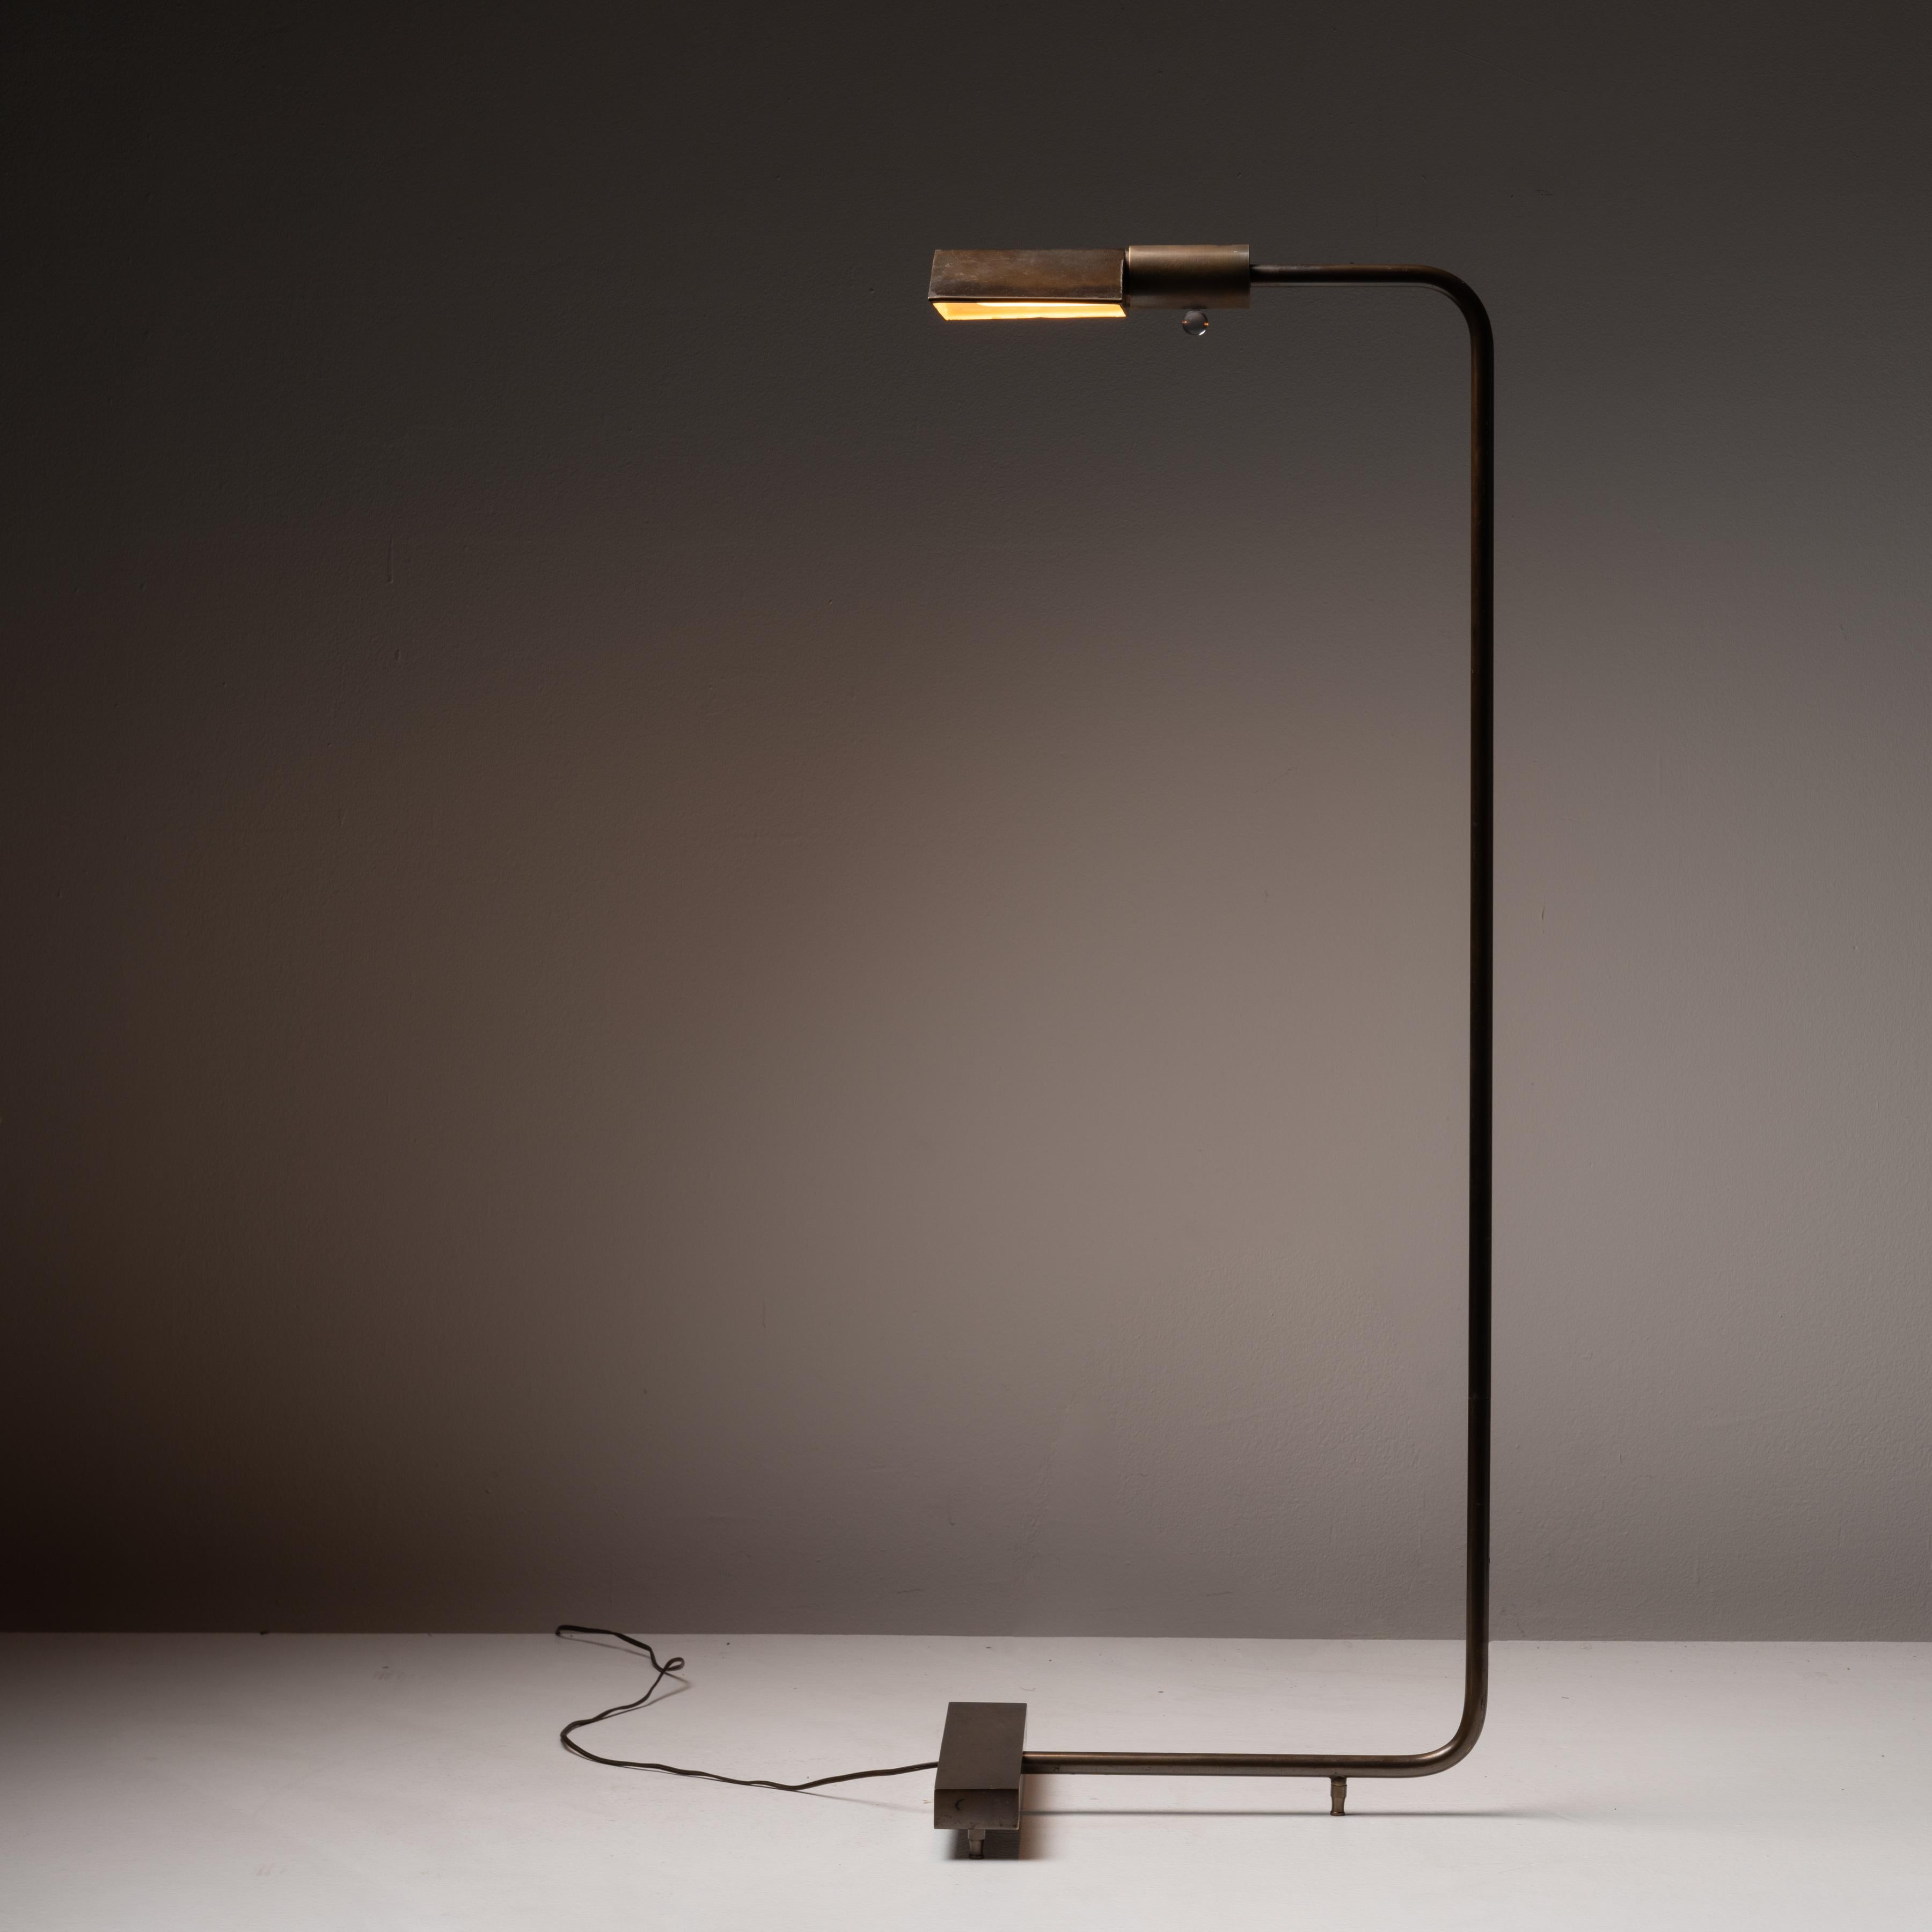 1MUWV Floor Lamp by Cedric Hartman. Designed and manufactured in the United States, in 1969. Early edition brass floor lamp, with triangular shade and rectangular weighted beam on the base. Holds one E26 socket. We recommend using a 40w maximum